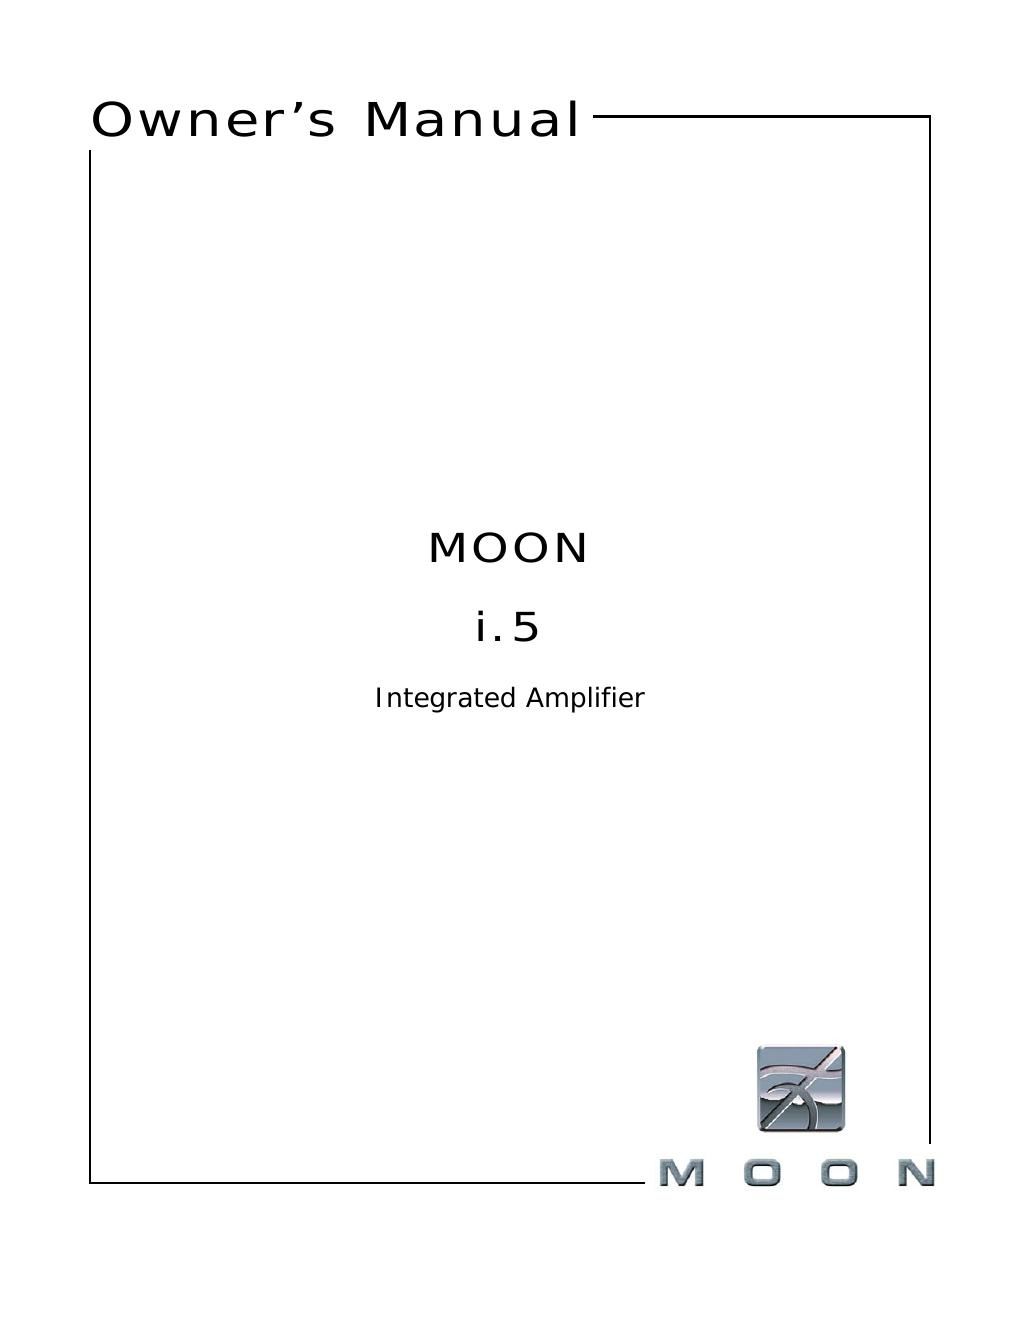 moon i 5 owners manual